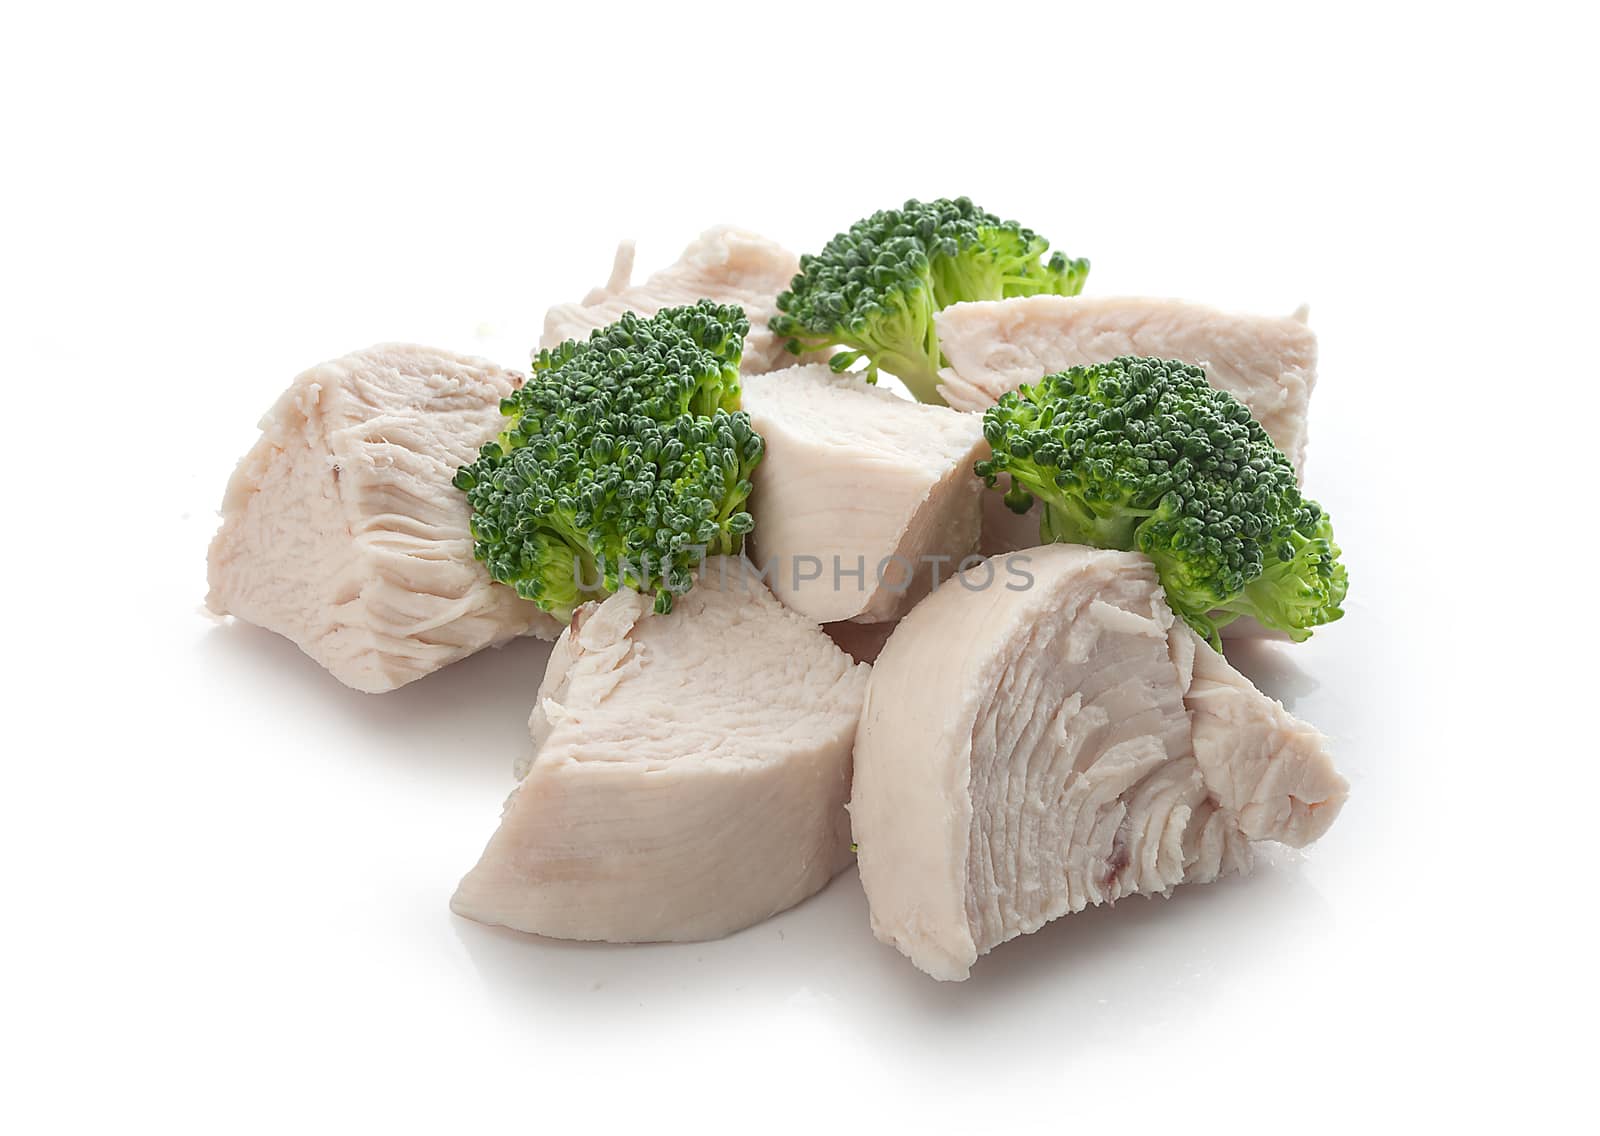 Isolated handfull of prepared chicken pieces with fresh green broccoli